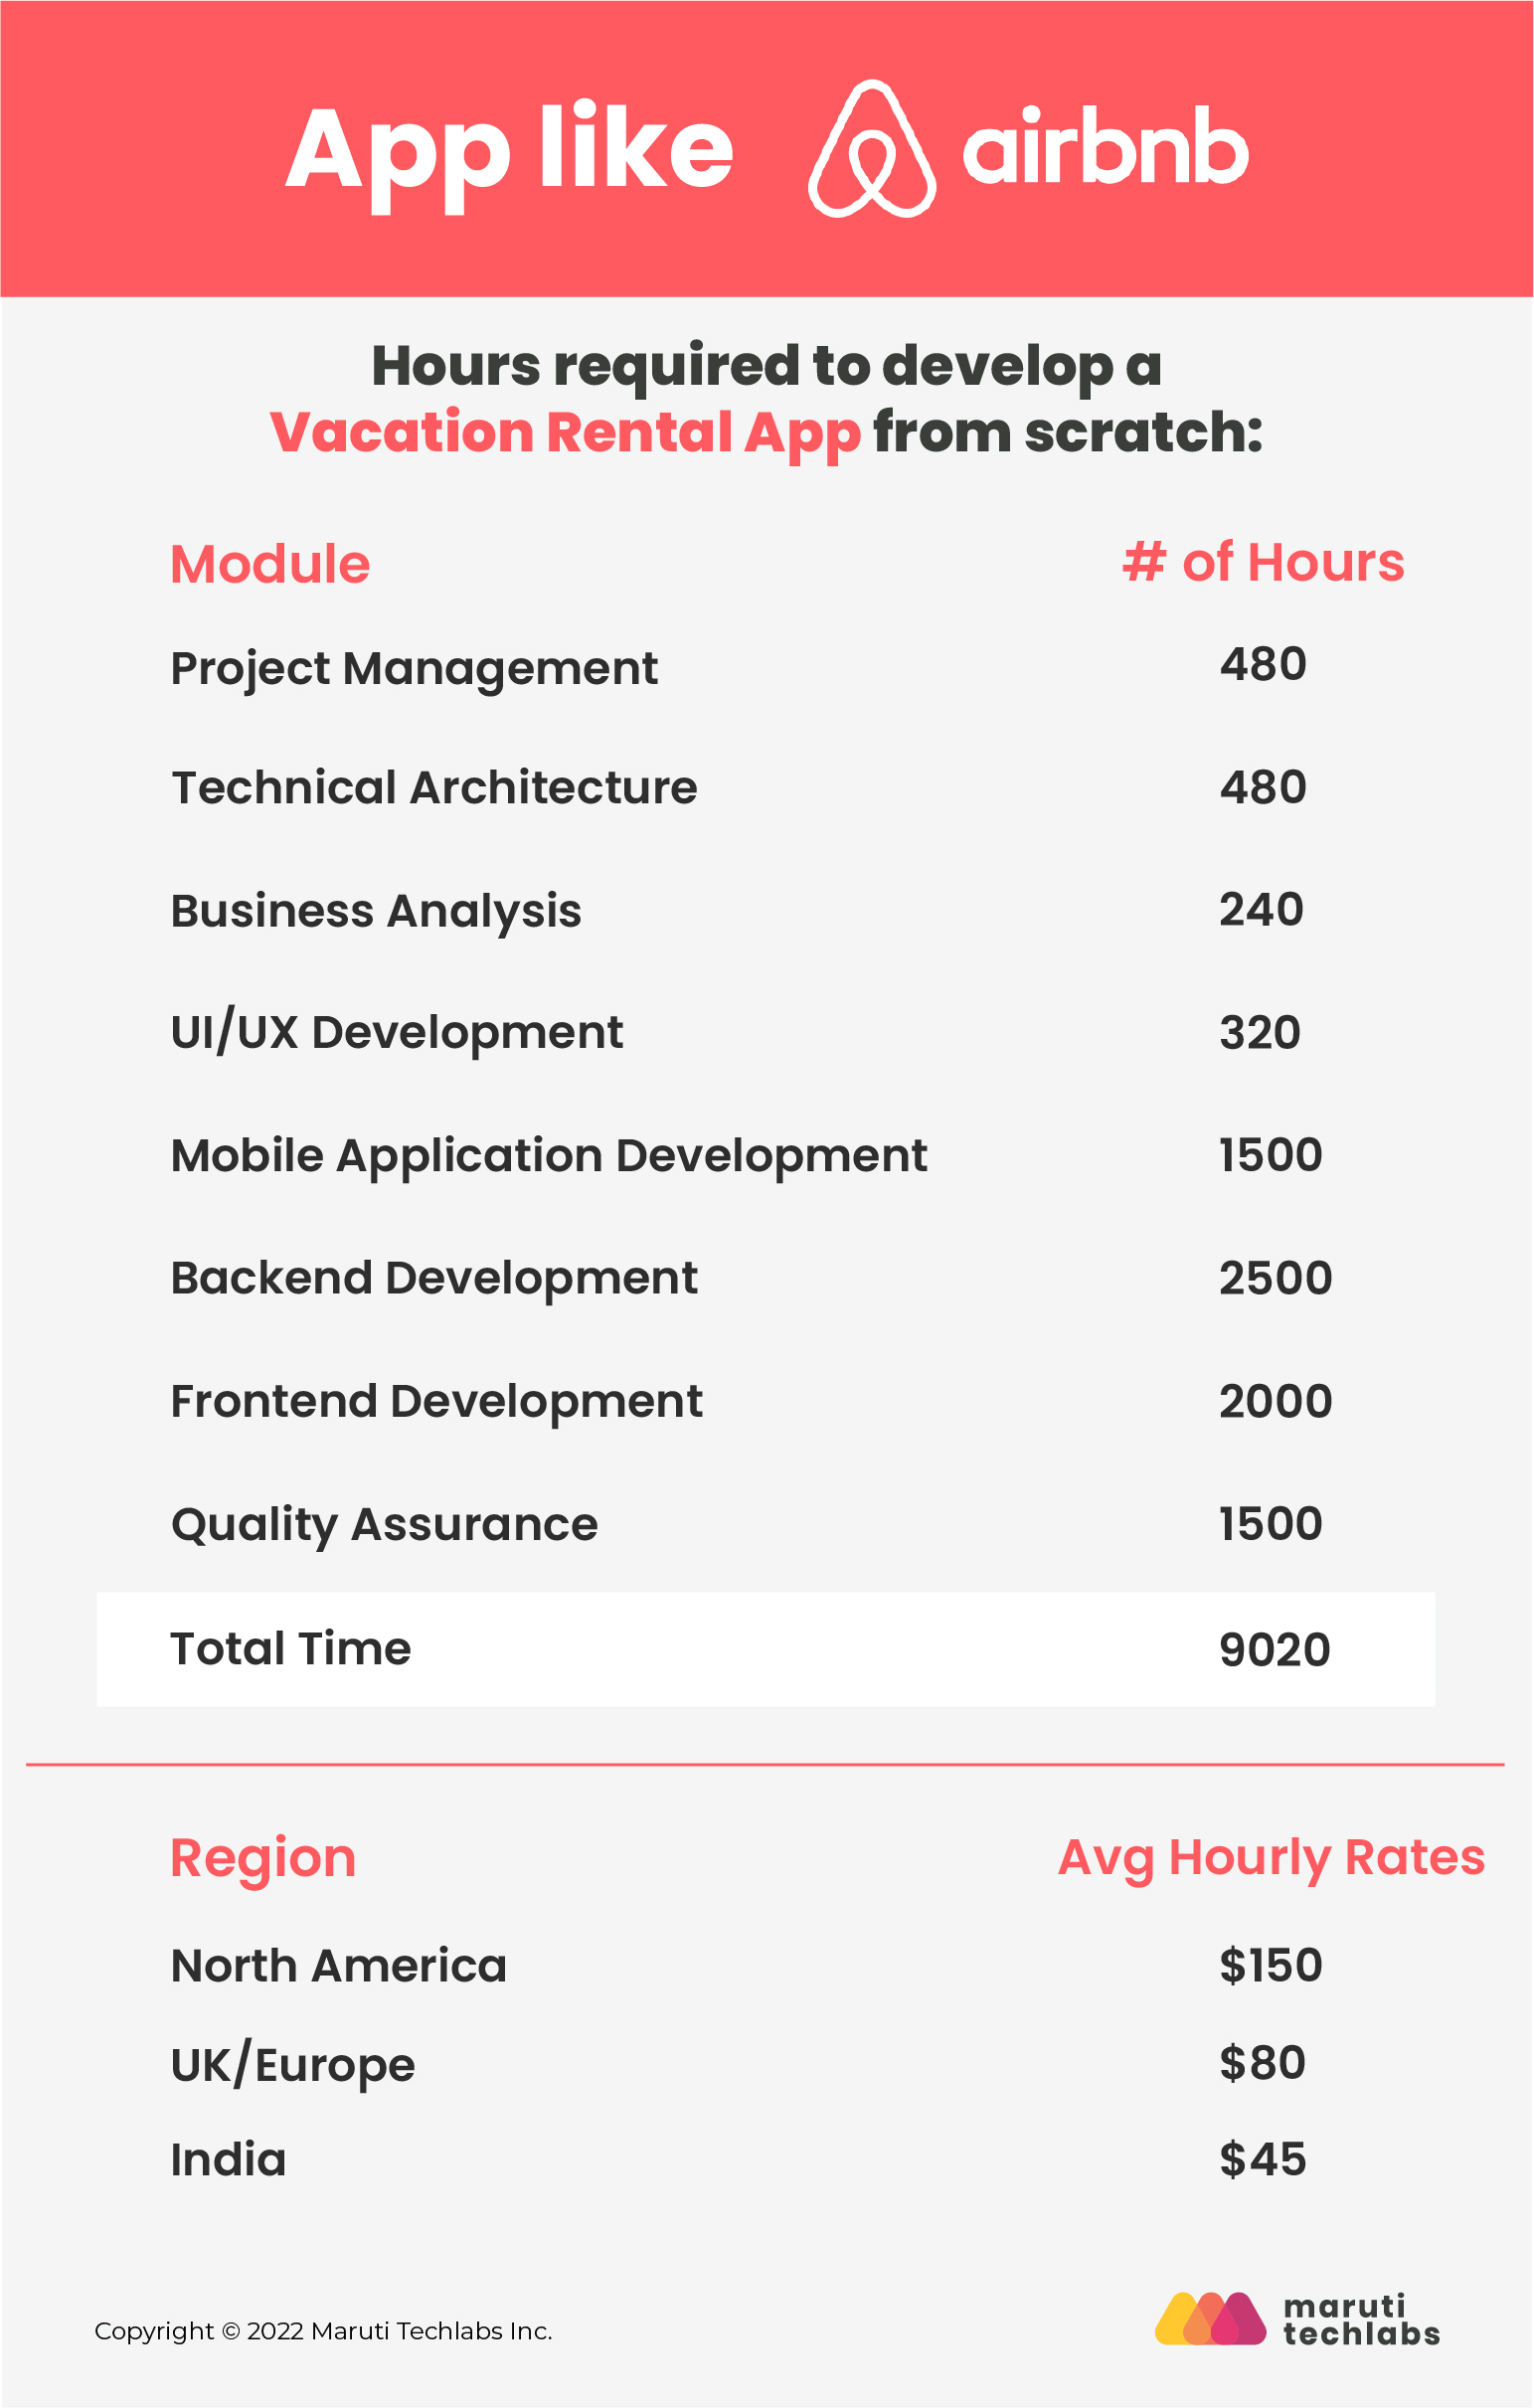 How to Build an App Like Airbnb